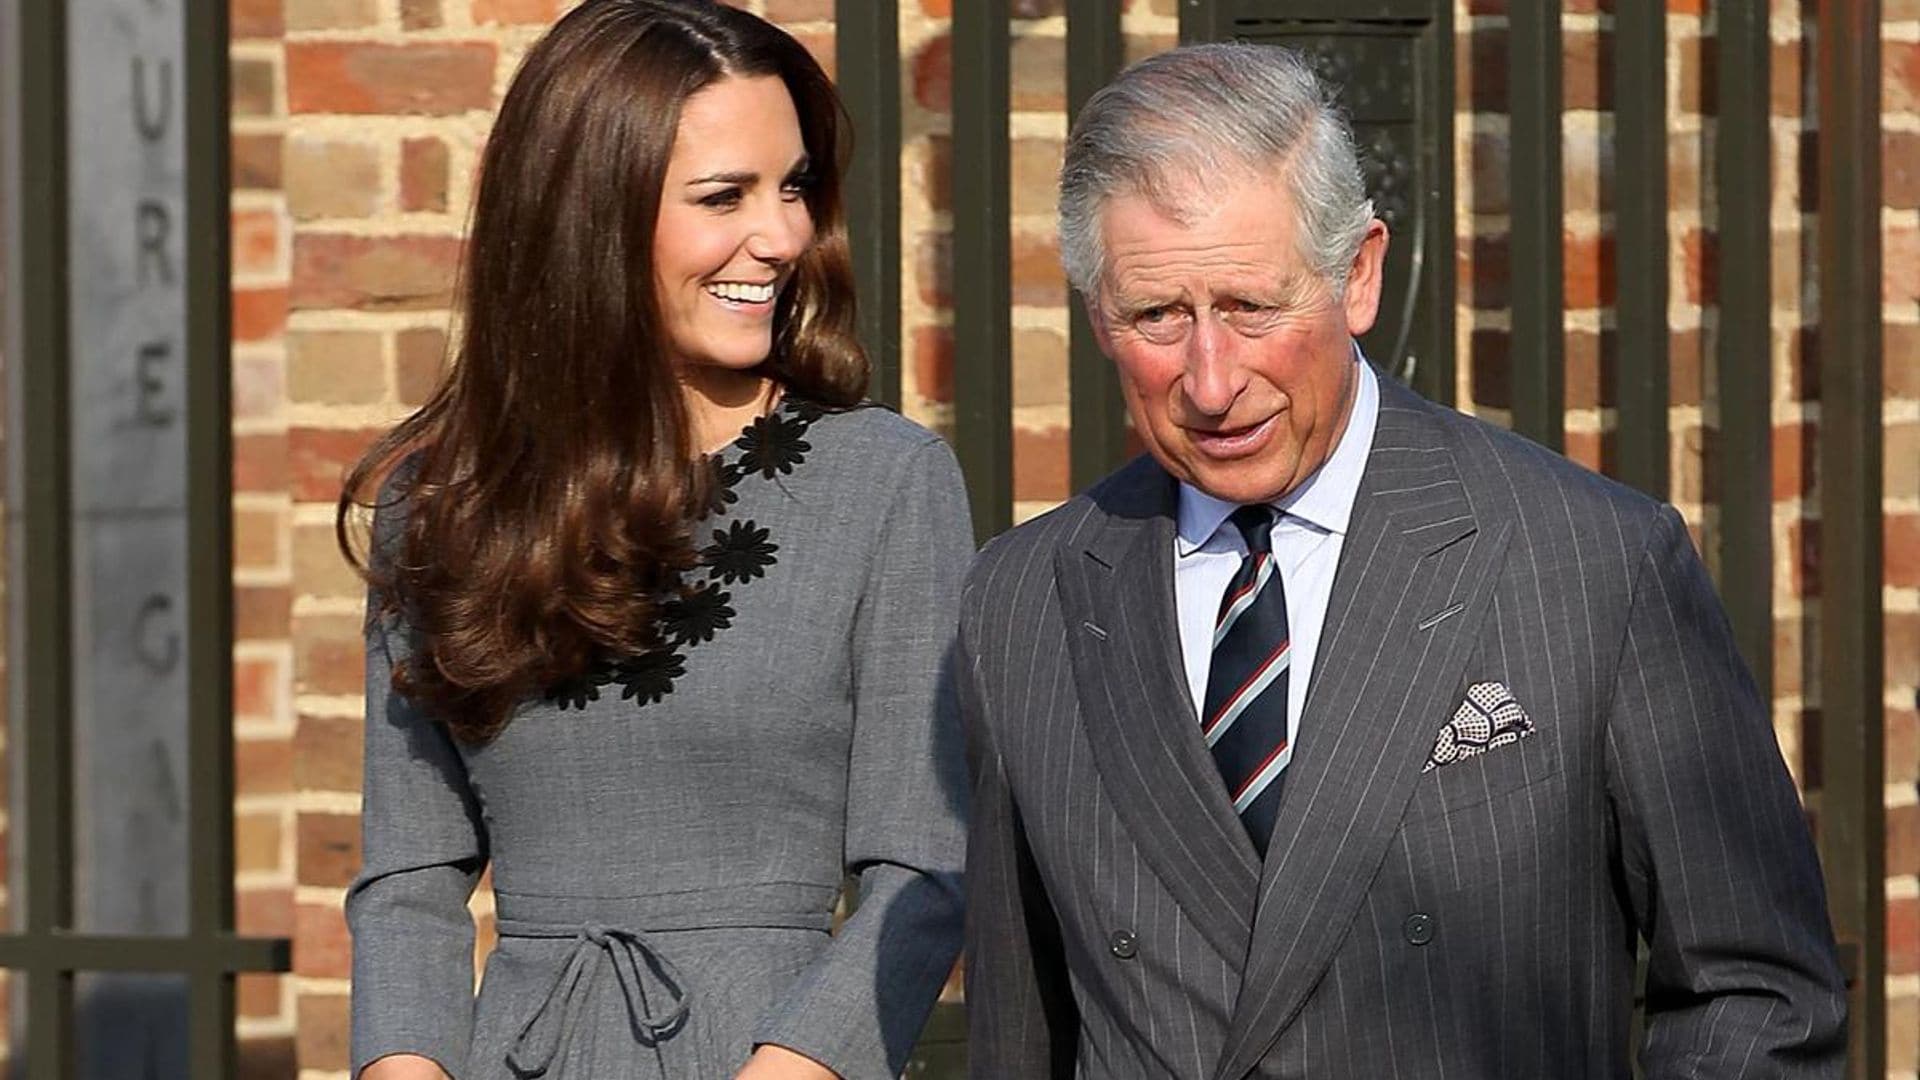 King Charles has become one of Kate Middleton’s greatest sources of support